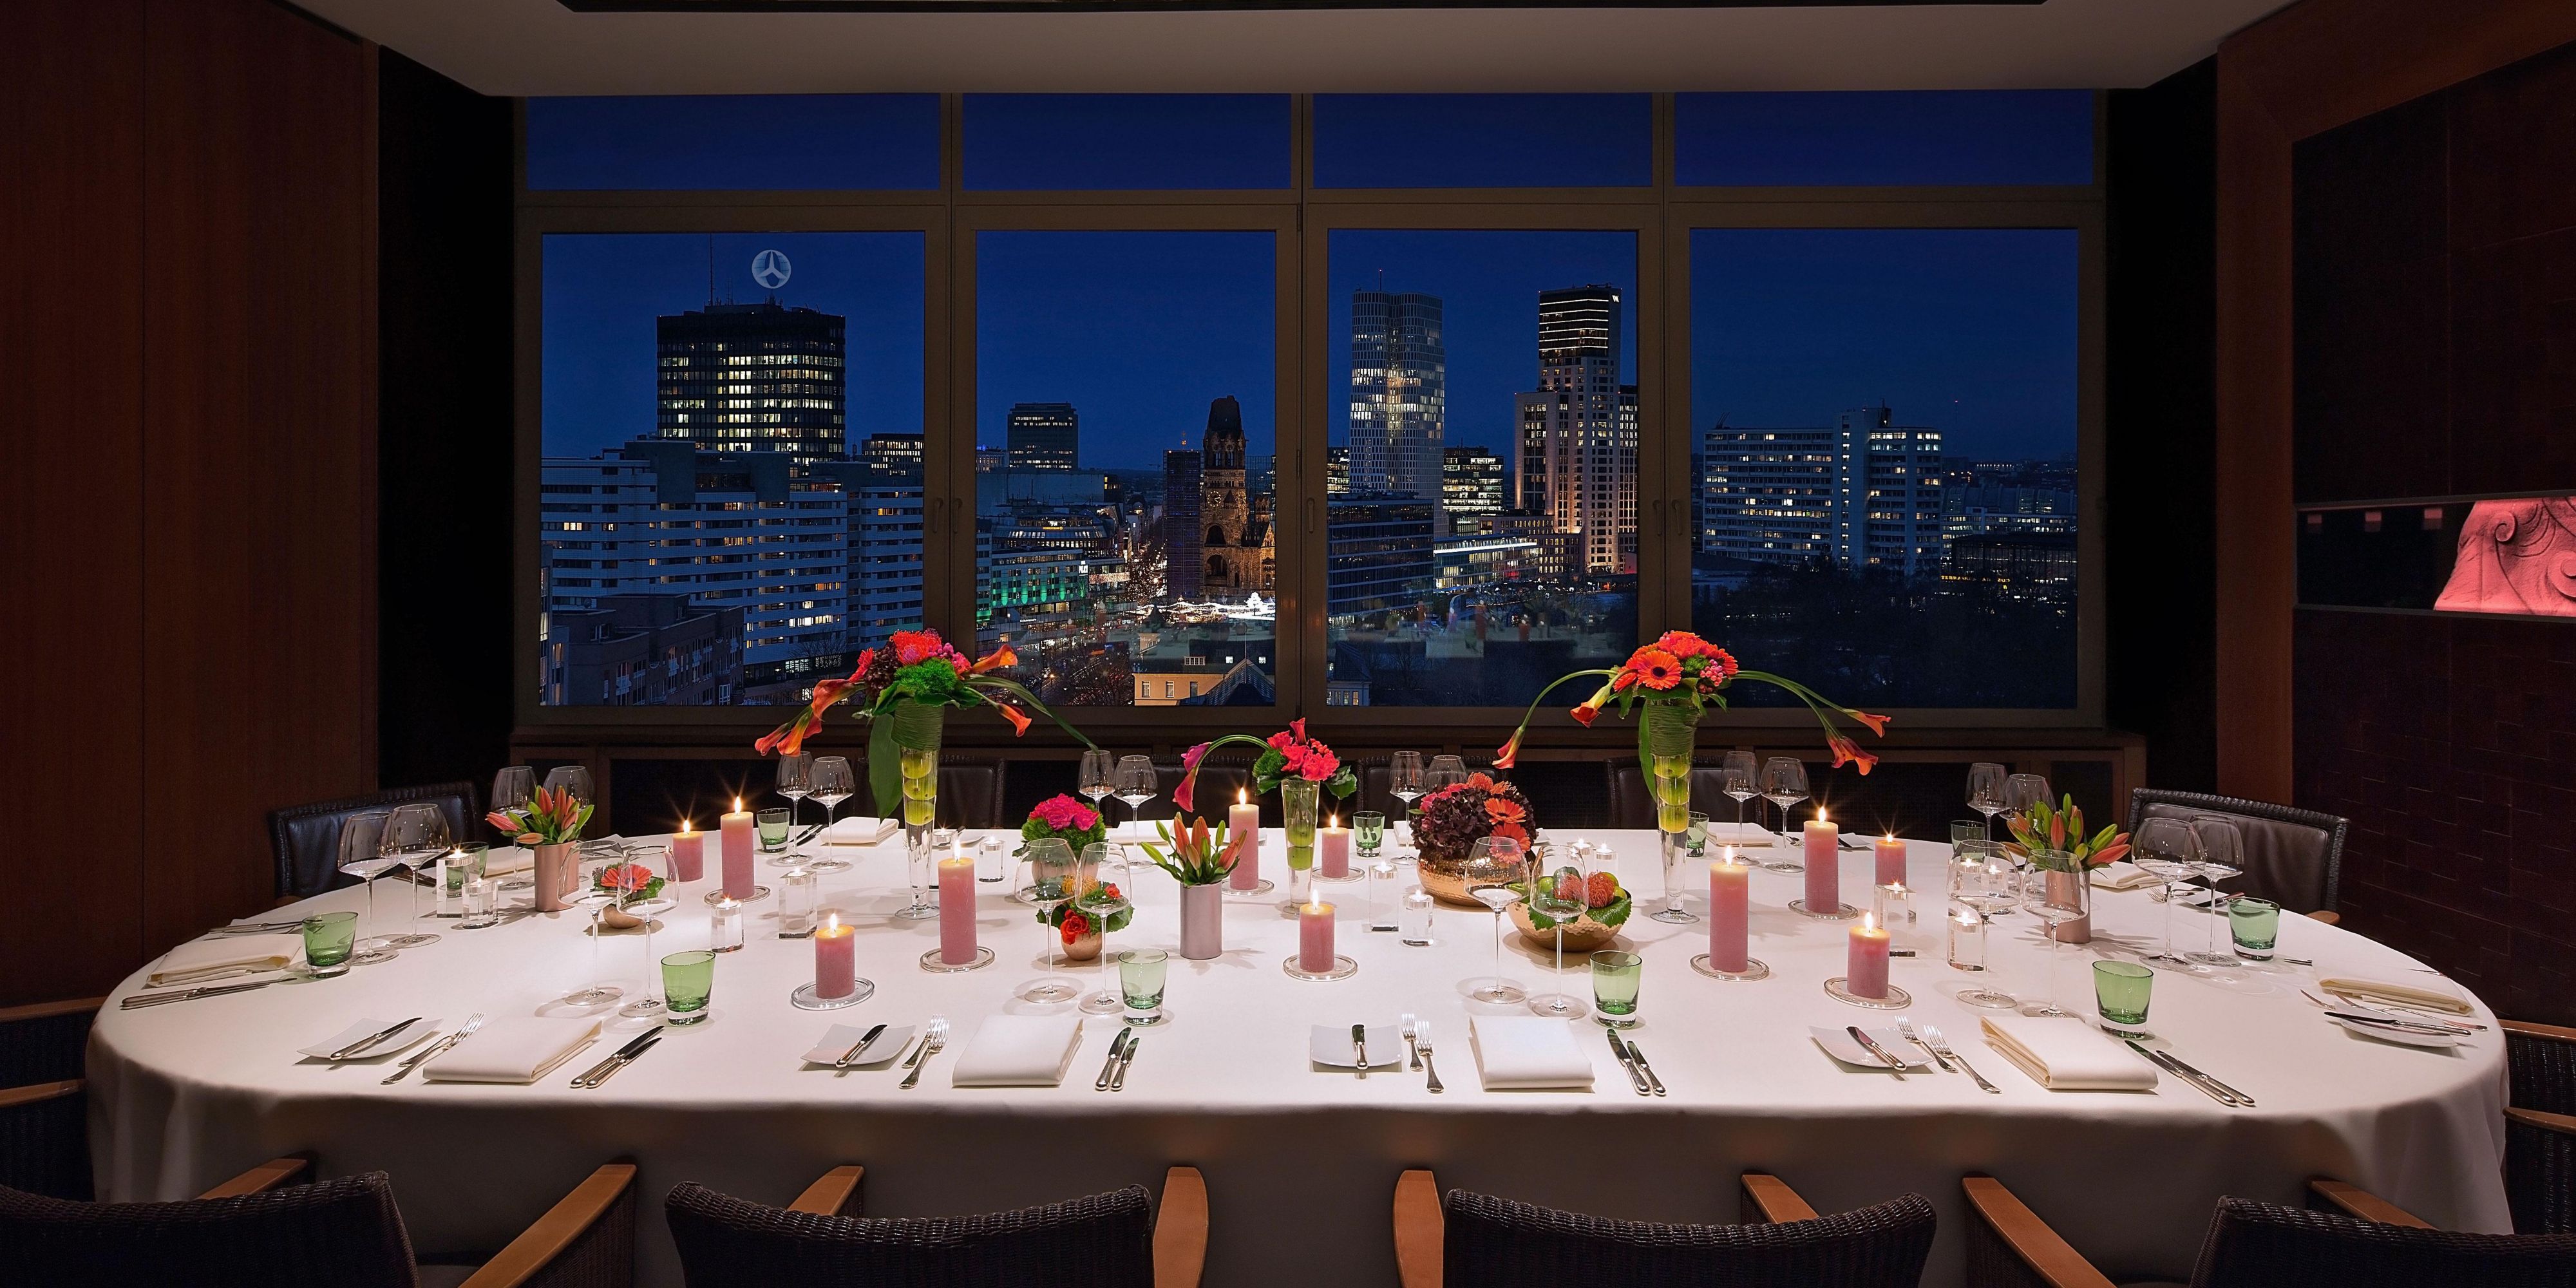 Exclusive events with a view of Berlin.
Three private dining rooms of different sizes offer the opportunity to enjoy events in a private atmosphere at the highest culinary level.